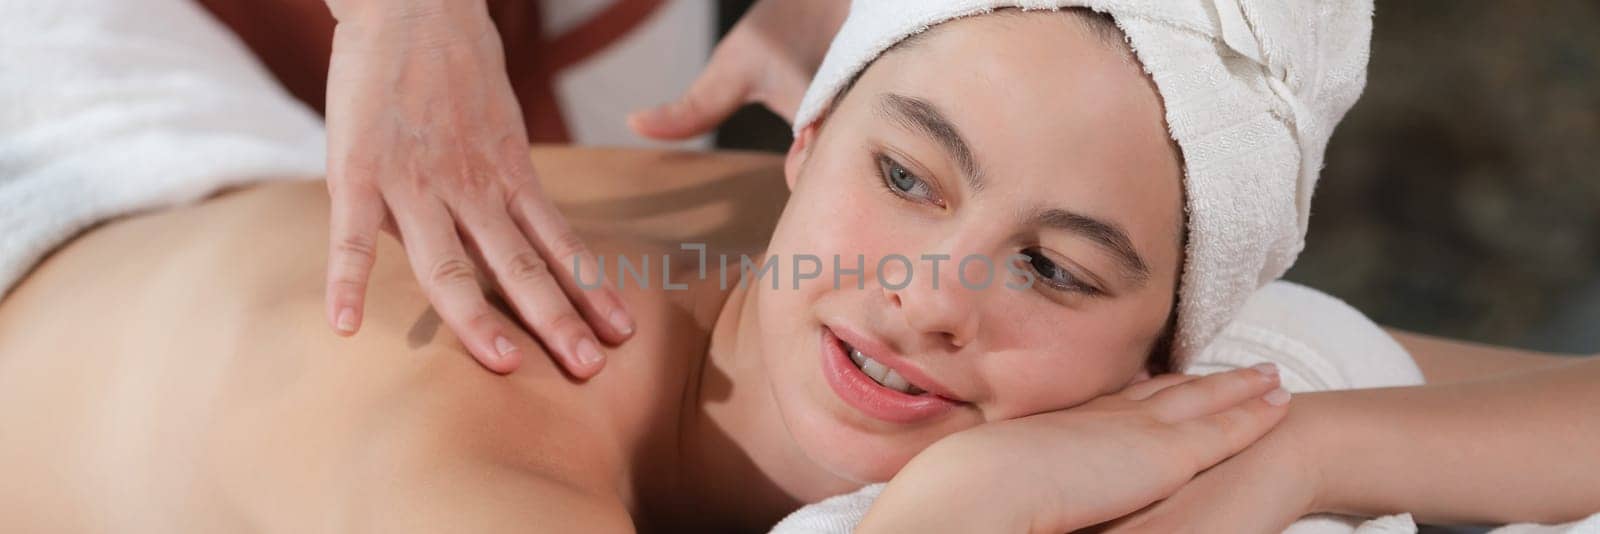 Beautiful young woman received a back massage on a spa bed. Tranquility. by biancoblue